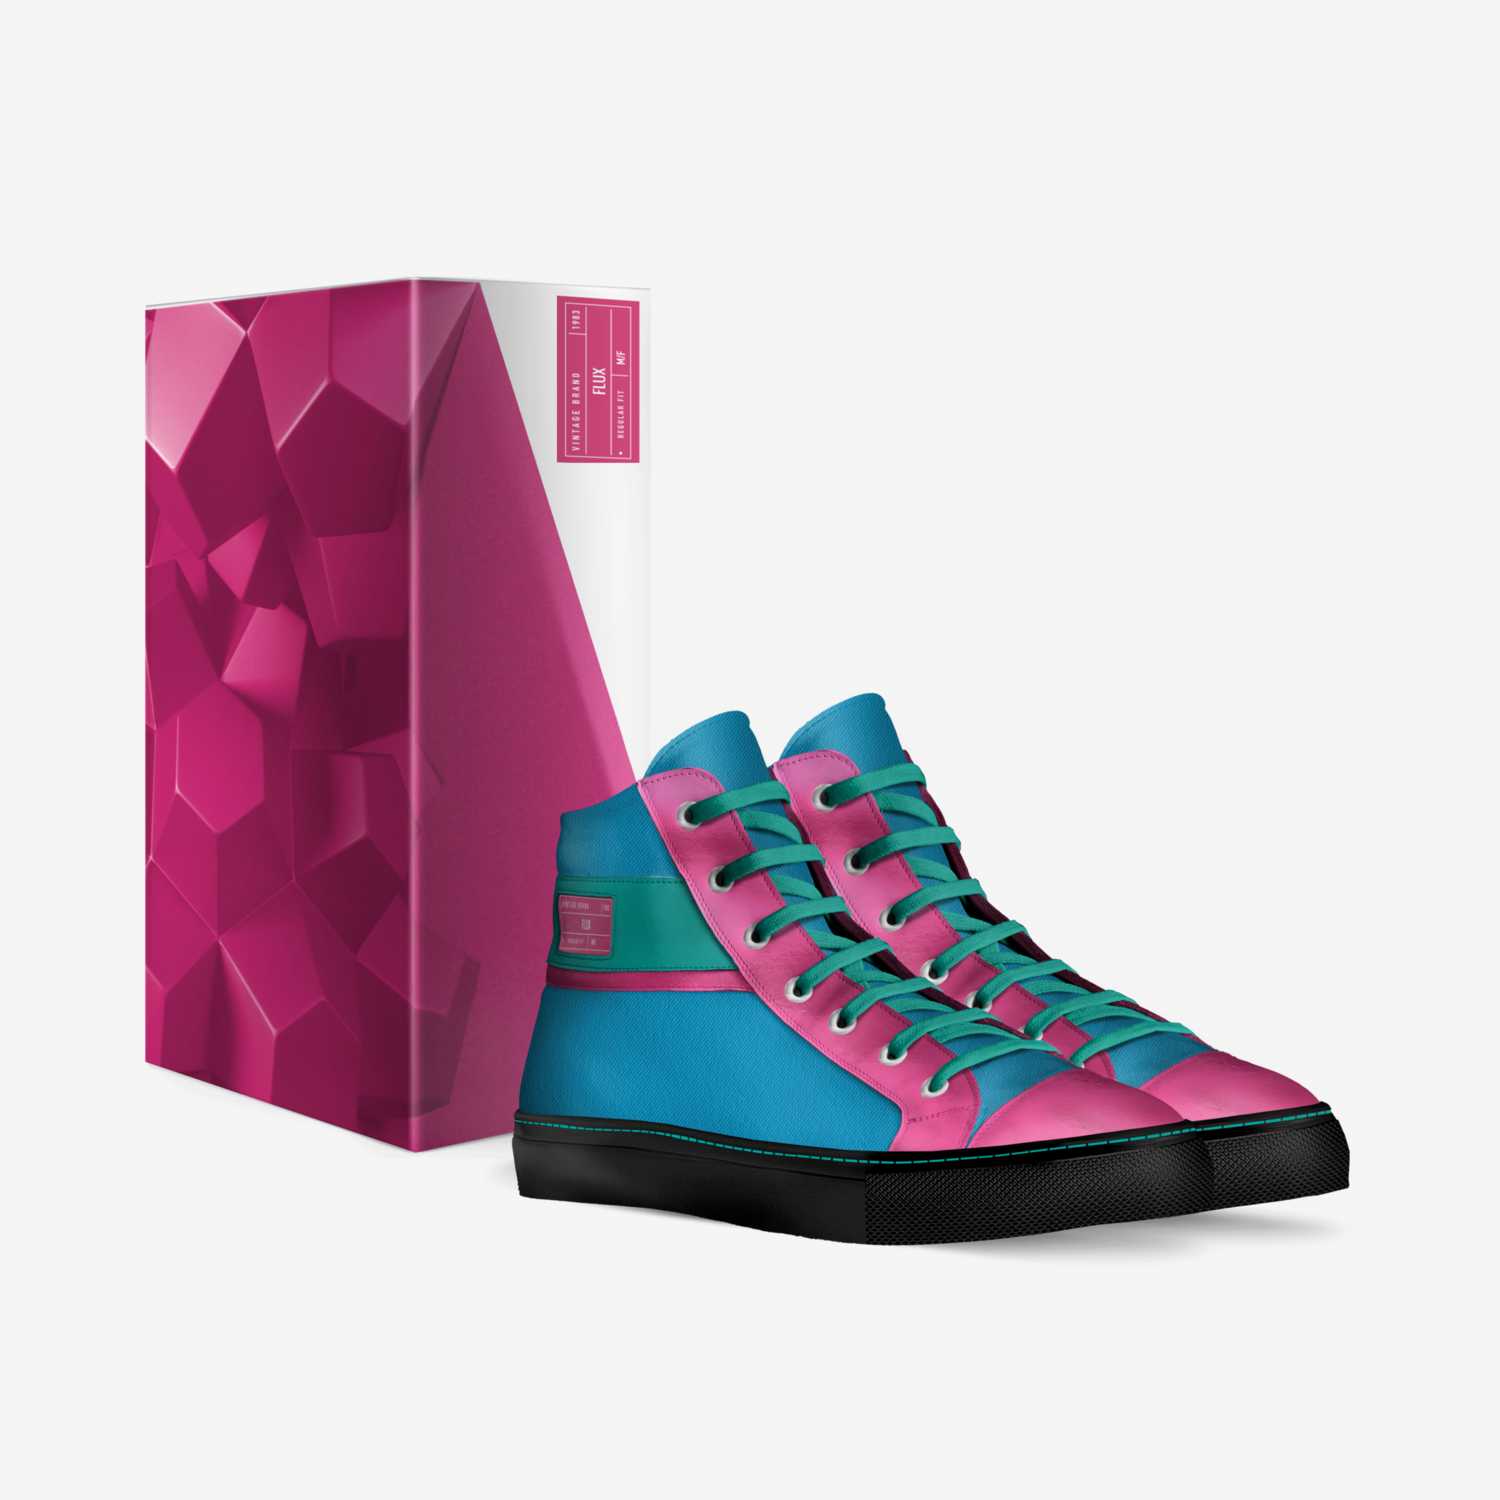 Flux custom made in Italy shoes by Ethan Bonser | Box view